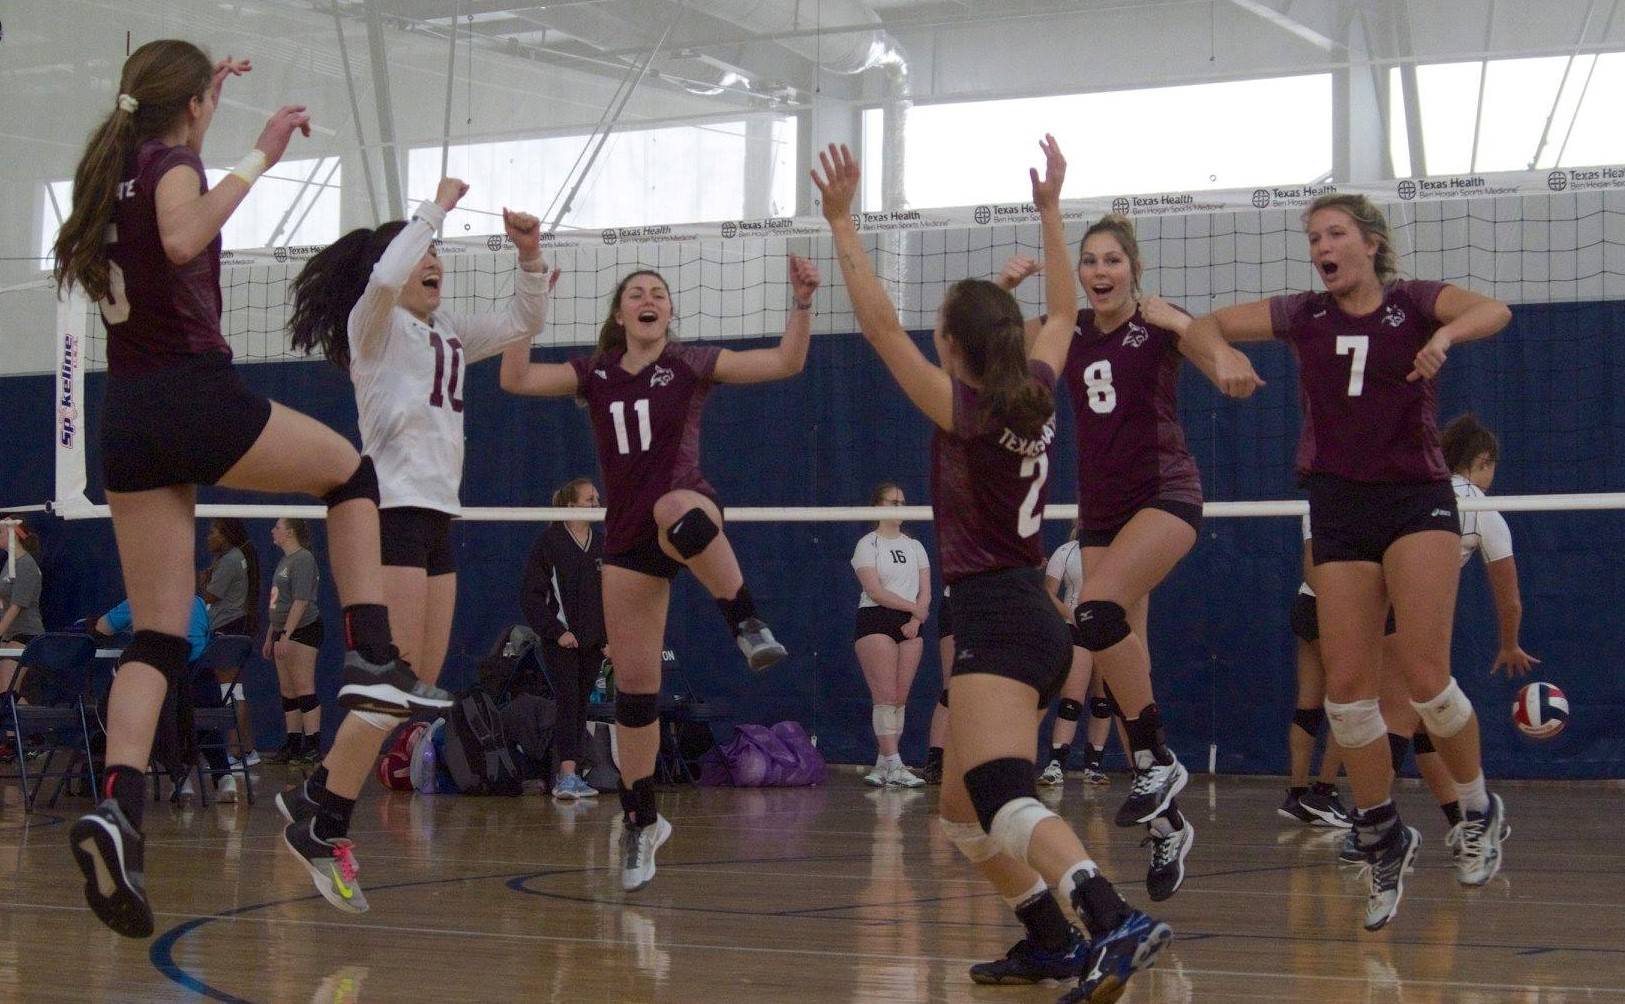 Women's Volleyball players all jumping celebrating a point